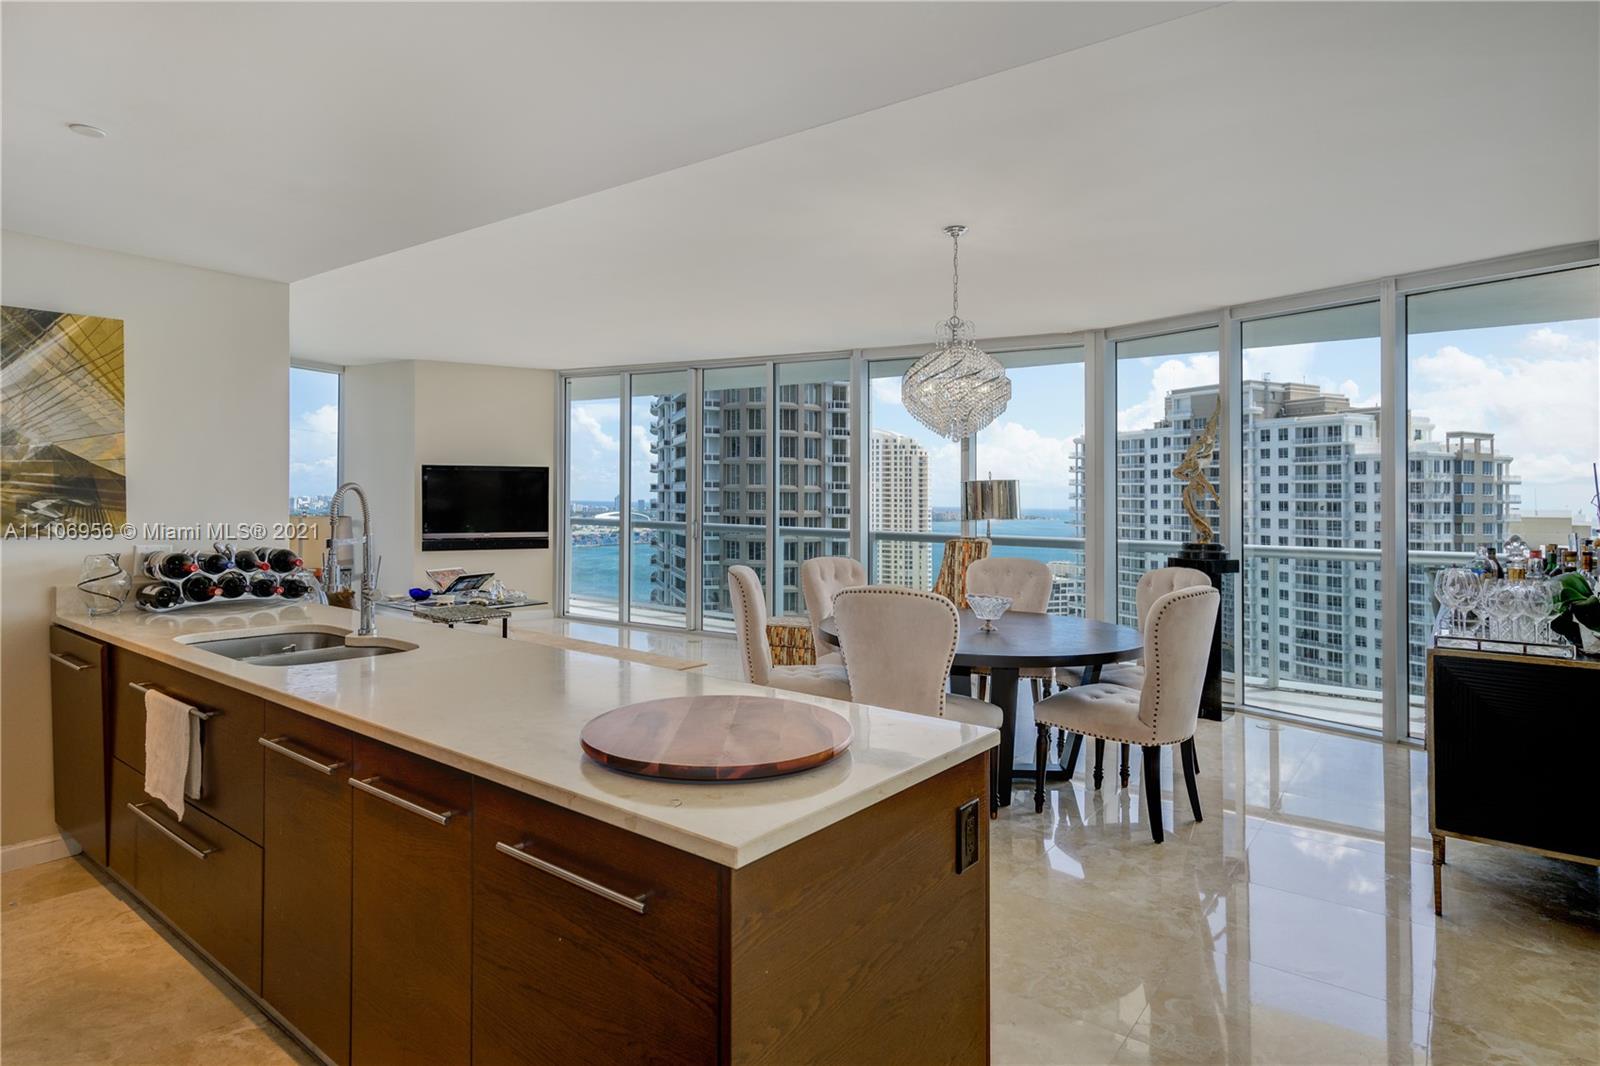 One of the best layouts in the Brickell area! 3 BD/2.5BA corner unit with gorgeous water views from all rooms. Gourmet kitchen with stainless steel appliances, assigned parking space, pet friendly & more. Hip and luxurious building by Philippe Stark with one of a kind common area and amenities. High-end restaurants on premises (Cipriani and Cantina La Veinte). Walkable neighborhood, 5 min walk to Brickell City Center.